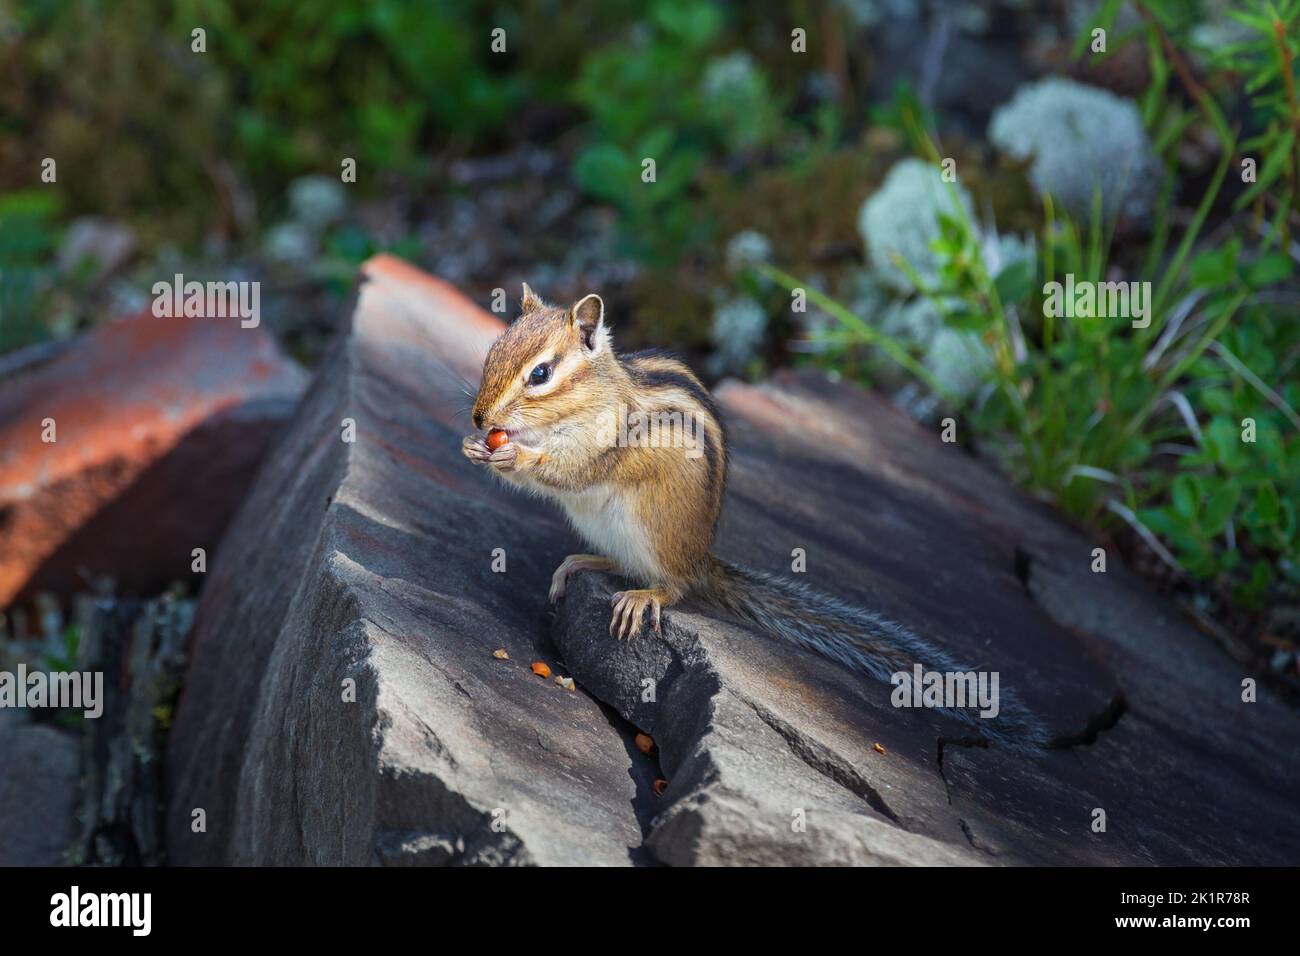 Chipmunk eats nuts while sitting on a stone. Close-up with blurry forest background. Stock Photo